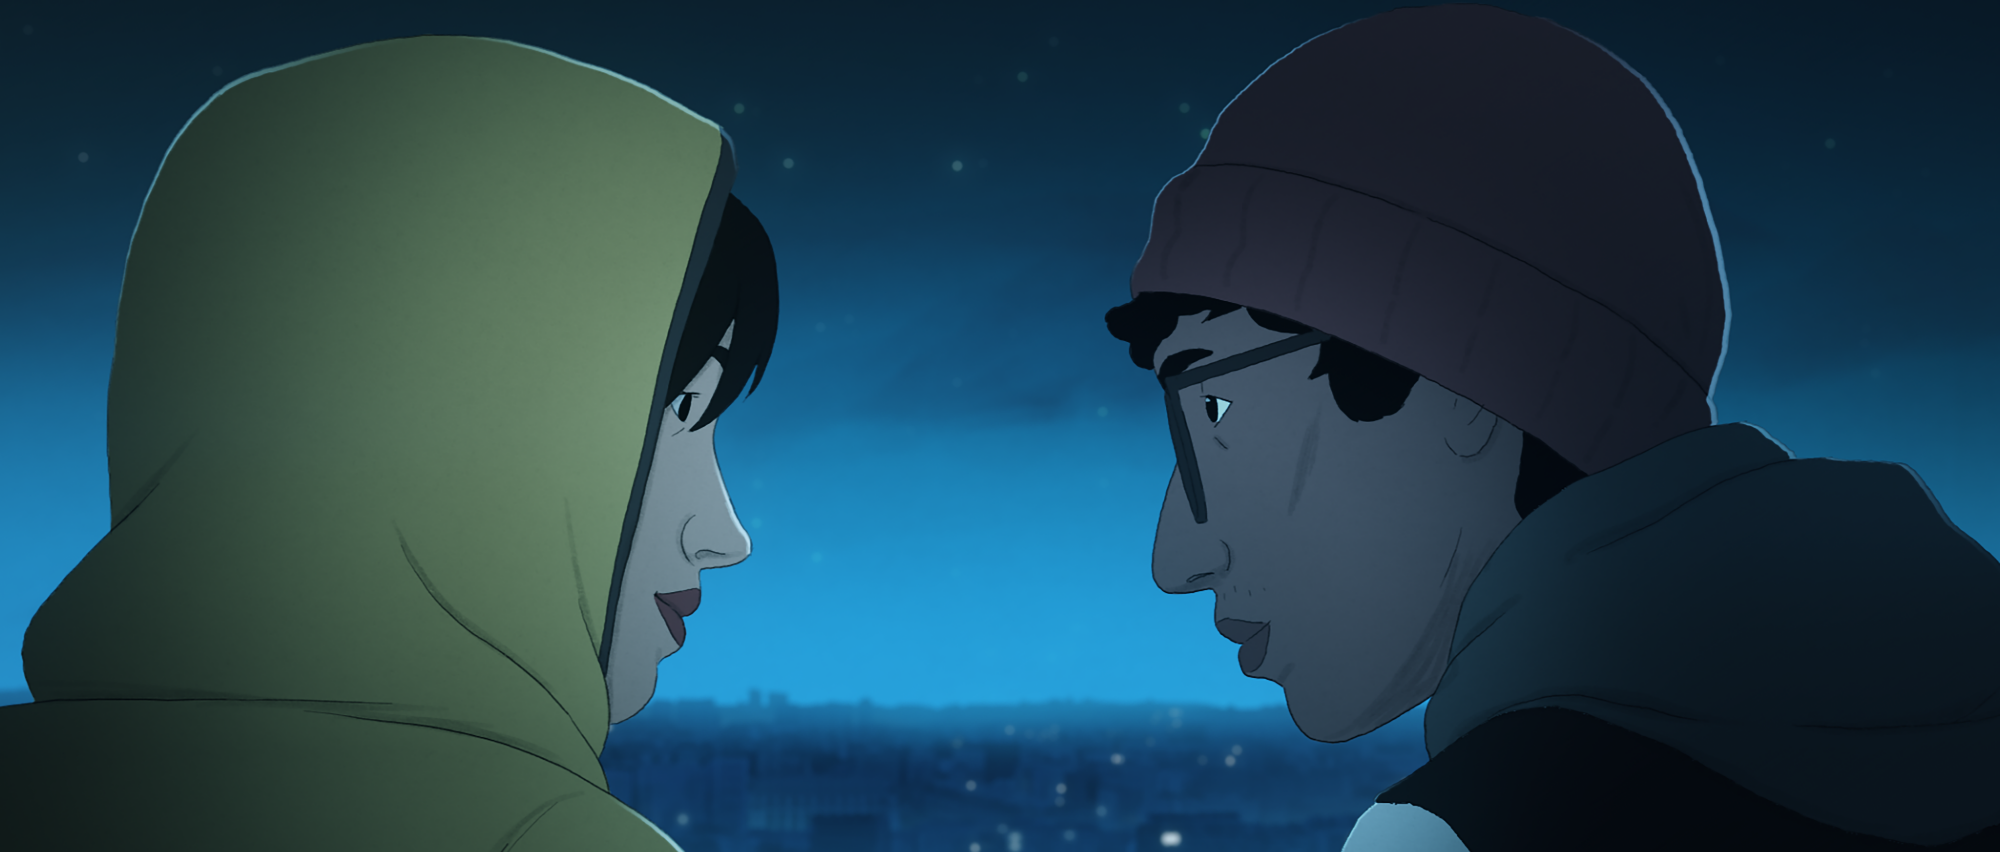 Dev Patel and Alia Shawkat voice Naoufel and Gabrielle in the English dub.